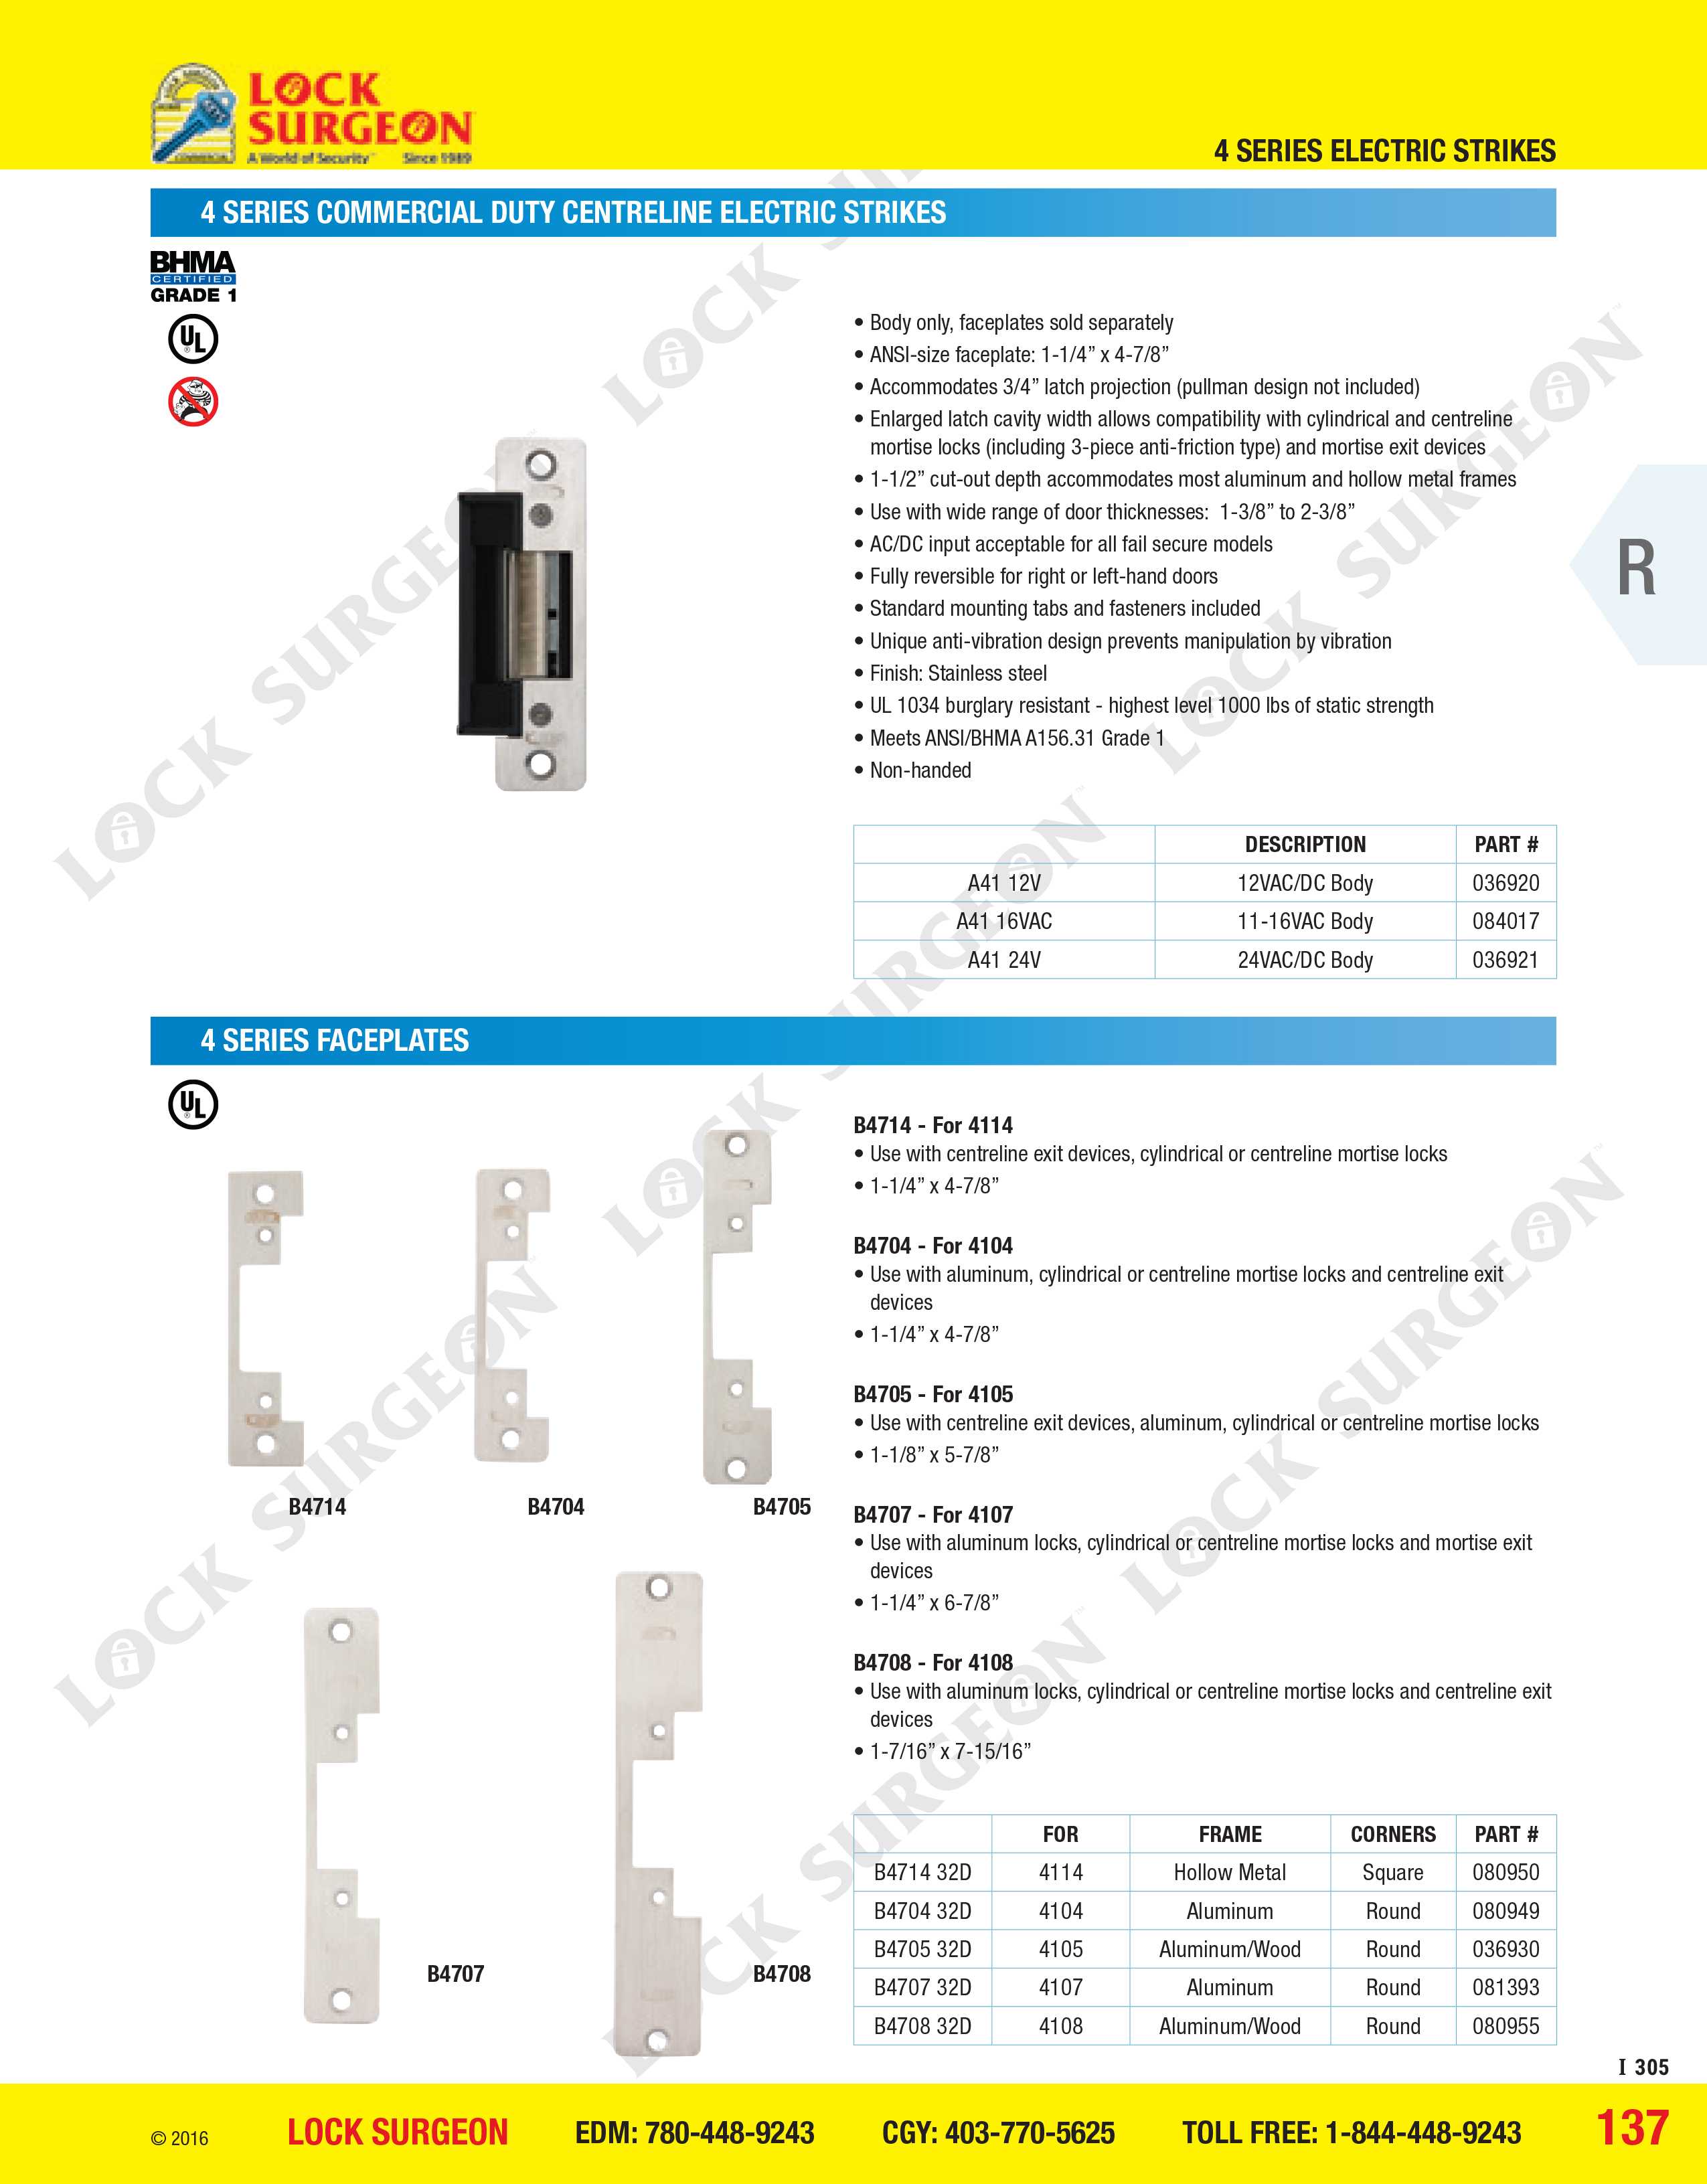 Series 4 commercial duty centreline electric strikes & faceplates.